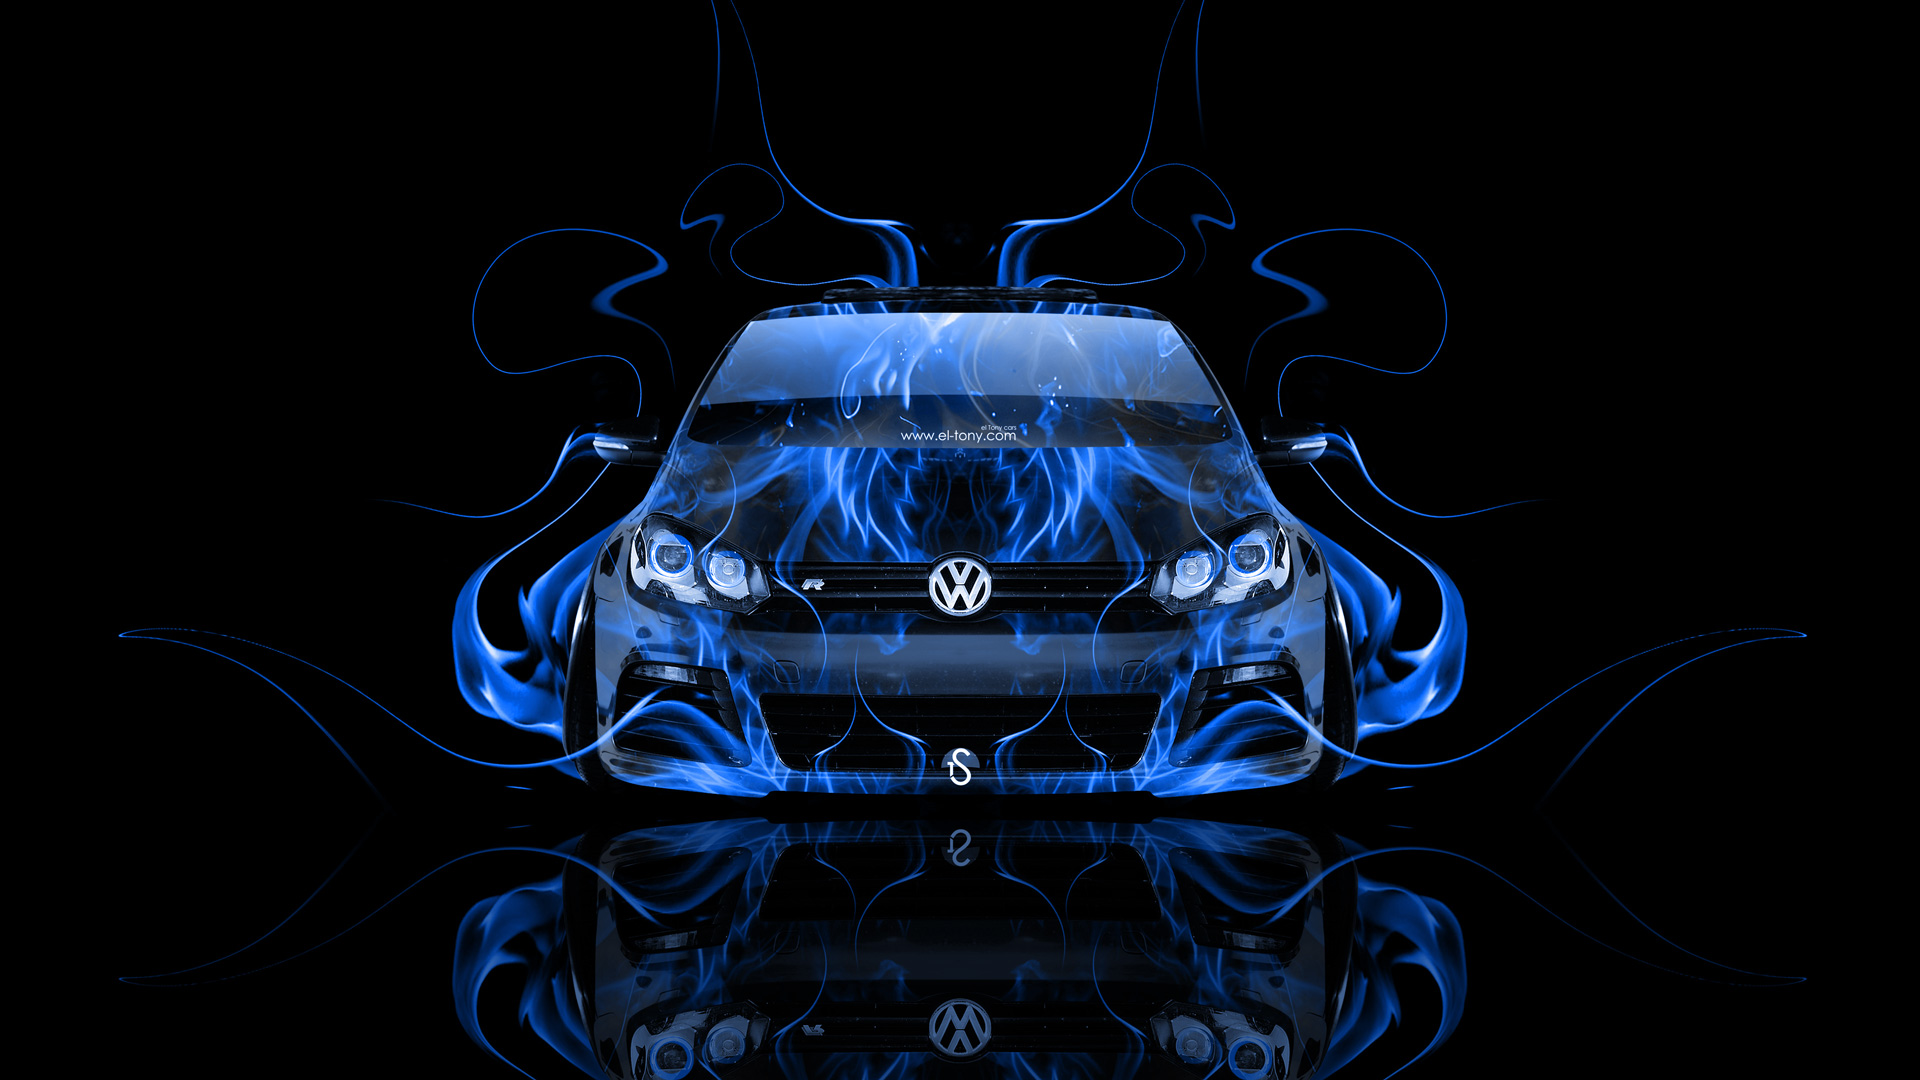 Volkswagen Golf R Front Blue Fire Abstract Car HD Wallpapers